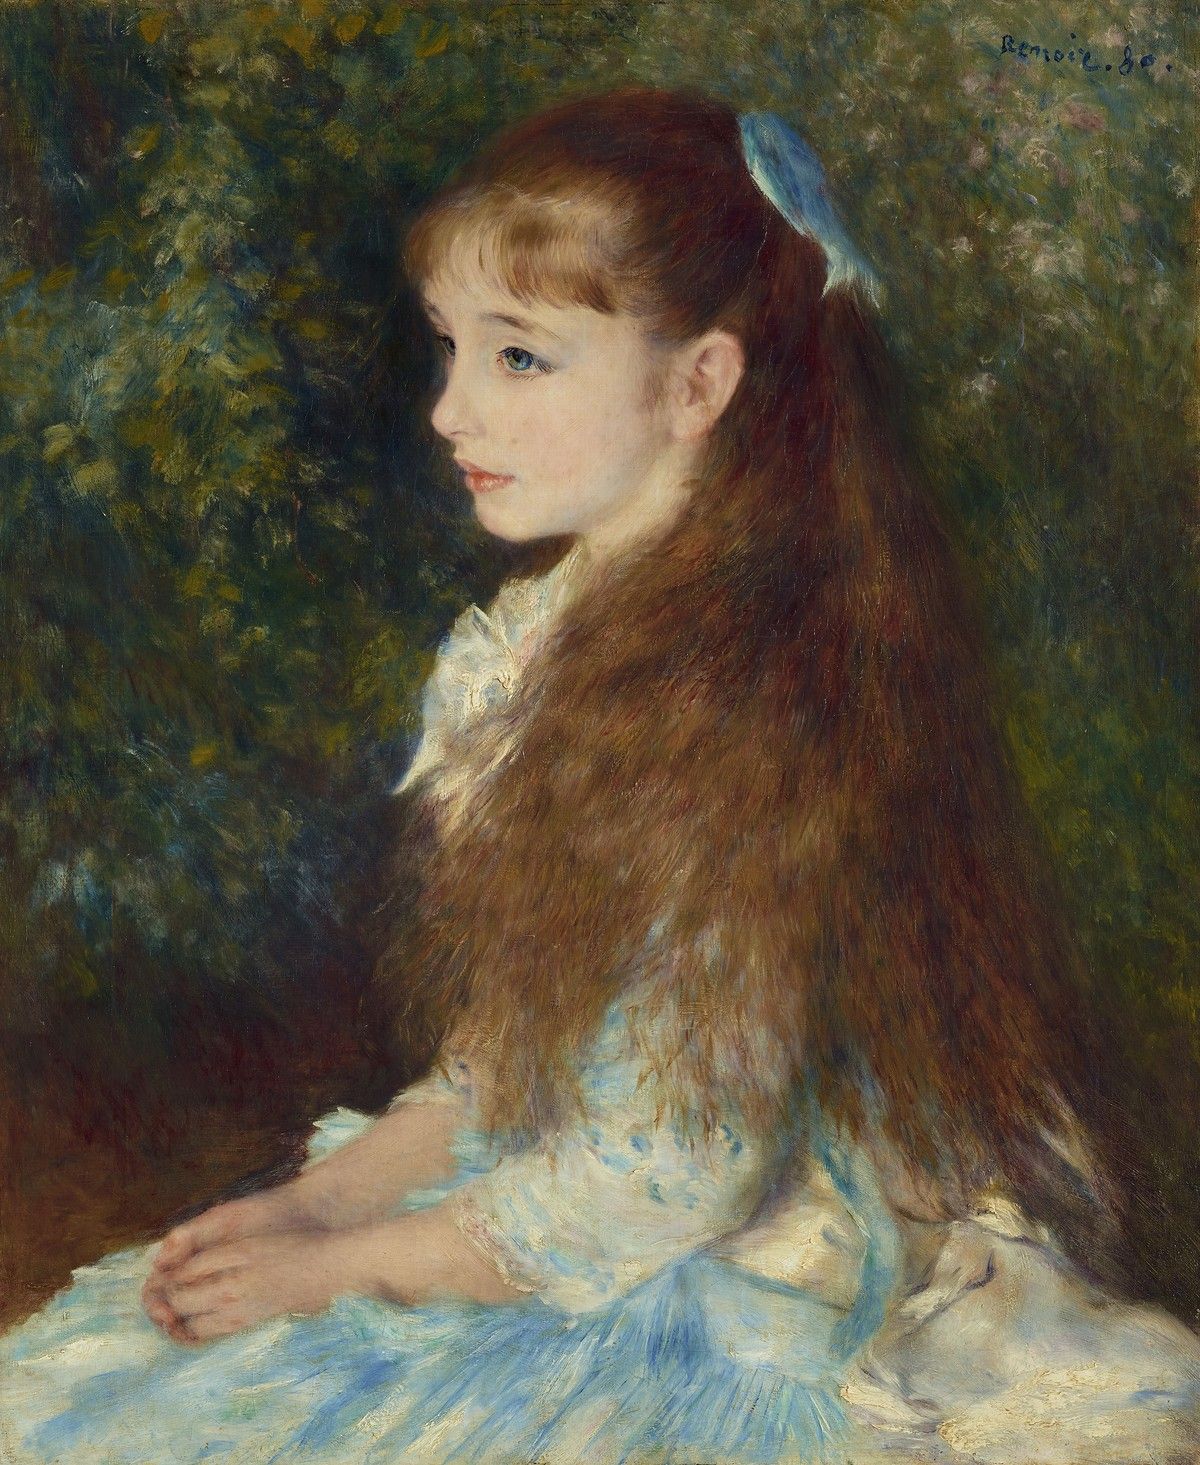 Pierre-Auguste Renoir, Irène Cahen d’Anvers (La Petite Irène) (1850), from the Emil Bührle Collection is on long-term loan to the Kunsthaus Zürich (formerly the Béatrice Camondo Collection)


